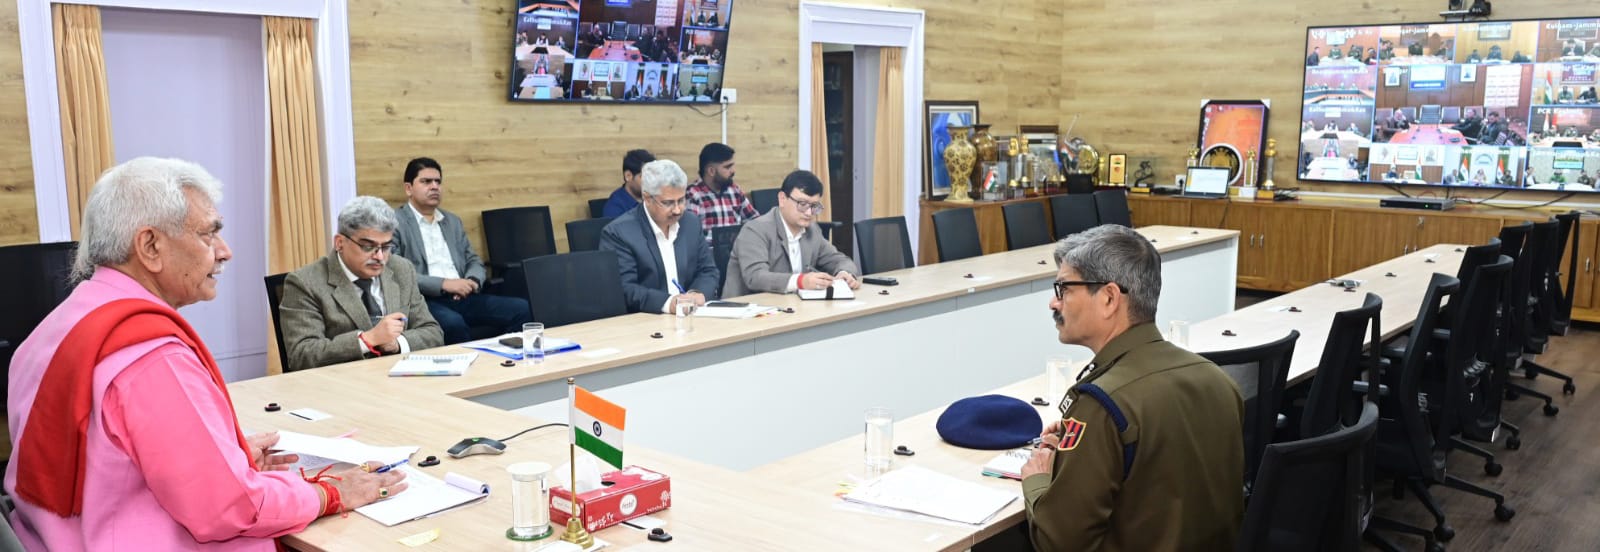 'Lt Governor reviews progress of Viksit Bharat Sankalp Yatra, recruitment to various posts and institutionalised outreach programmes across the UT'